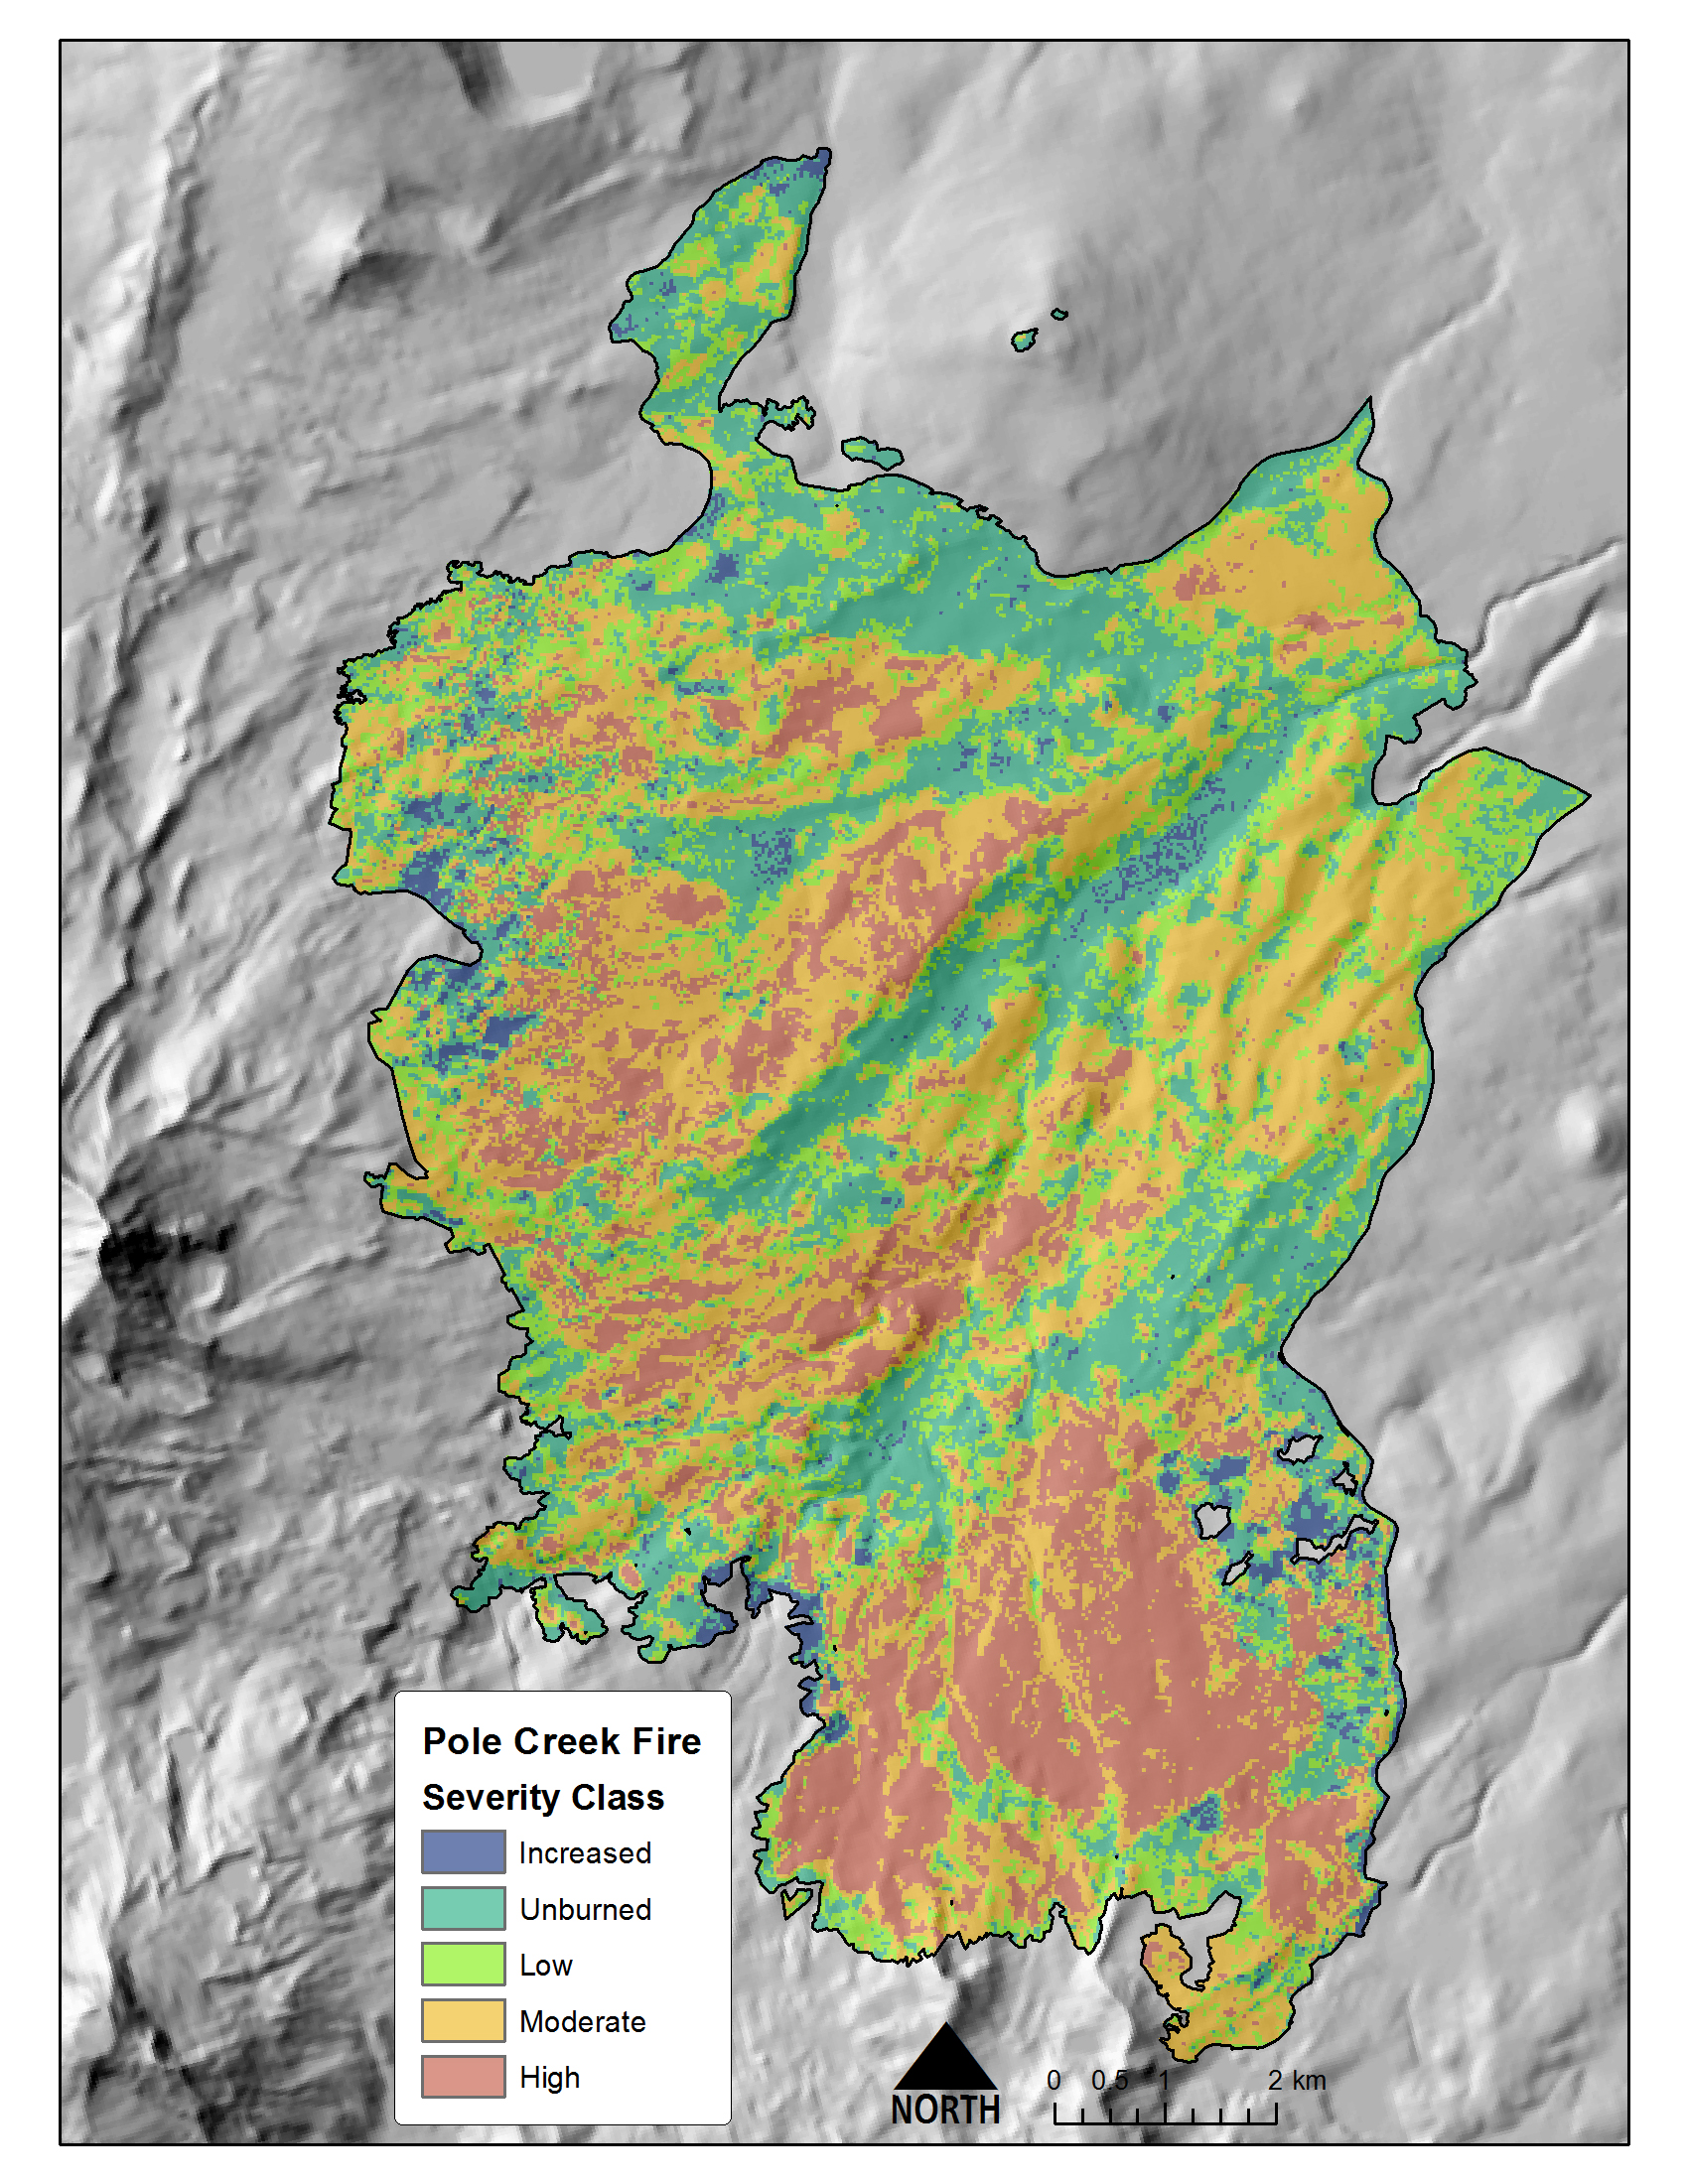 Pre-fire and post-fire lidar-derived burn severity for the Pole Creek Fire, 2012. North is oriented toward the top of the image.